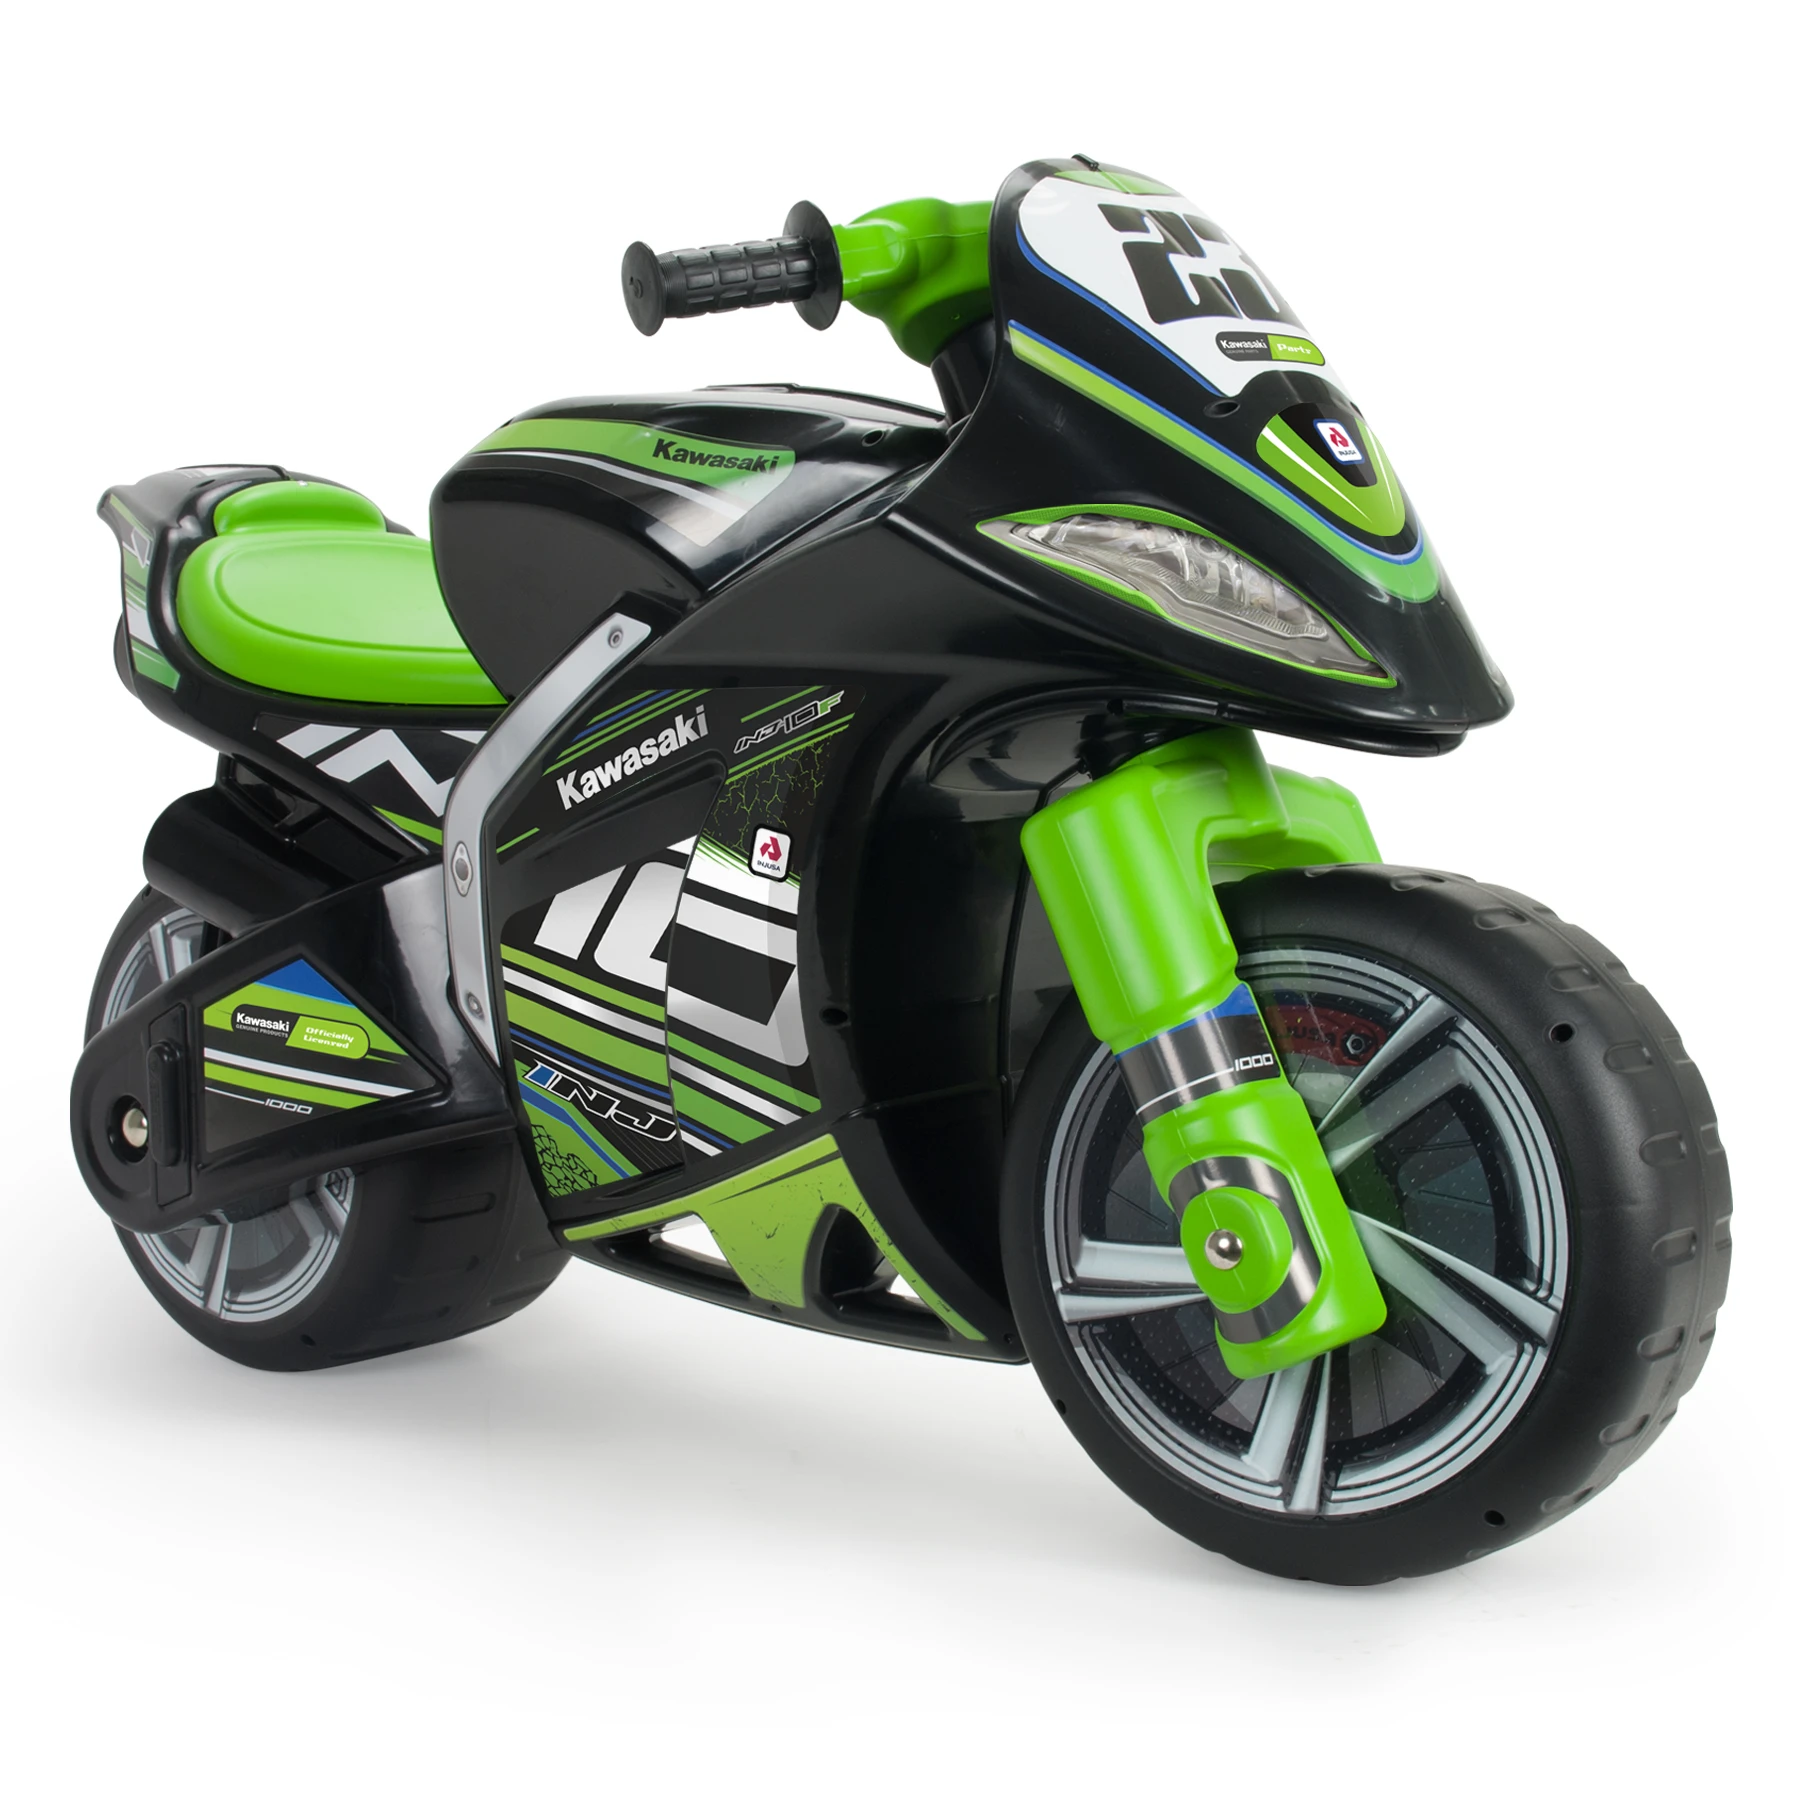 INJUSA Moto Ride on XL Winner Kawasaki Black with Wide Plastic Wheels and Carrying Handle Recommended + 3 Years|Kids' Bikes & Scooters| -